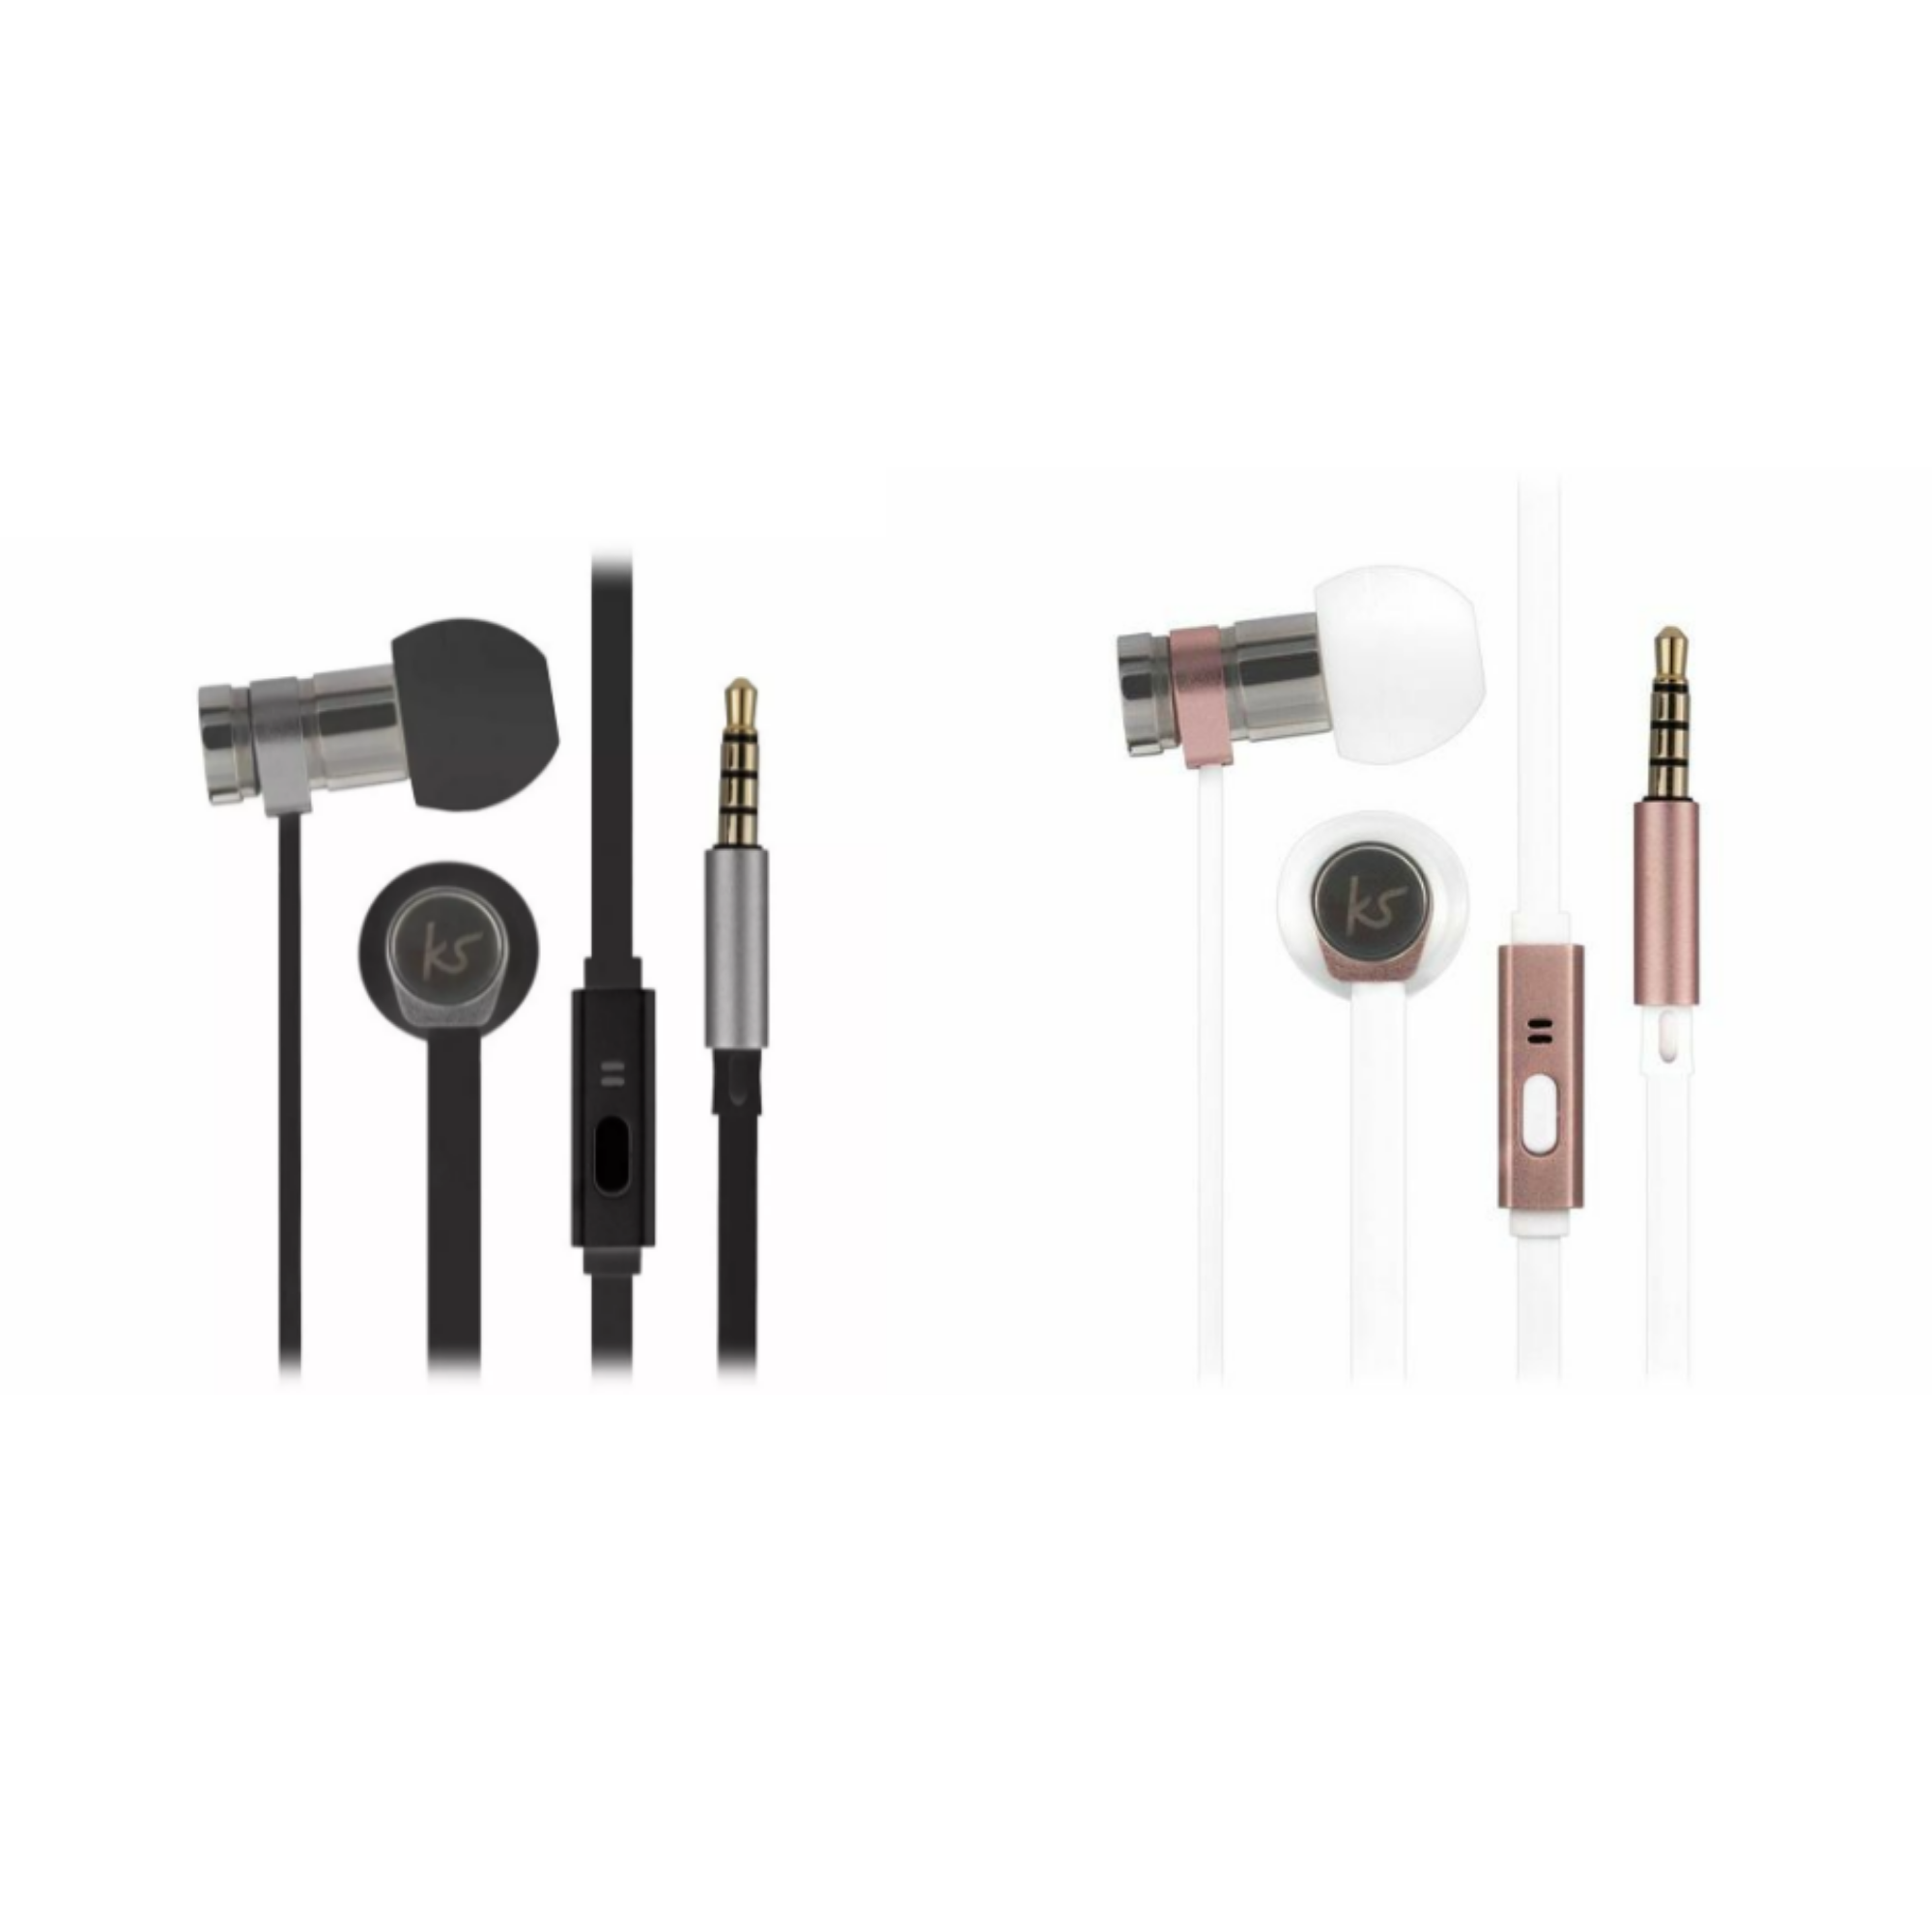 KitSound KSNOV Nova In-Ear Headphone with Microphone for Smartphones and Tablets